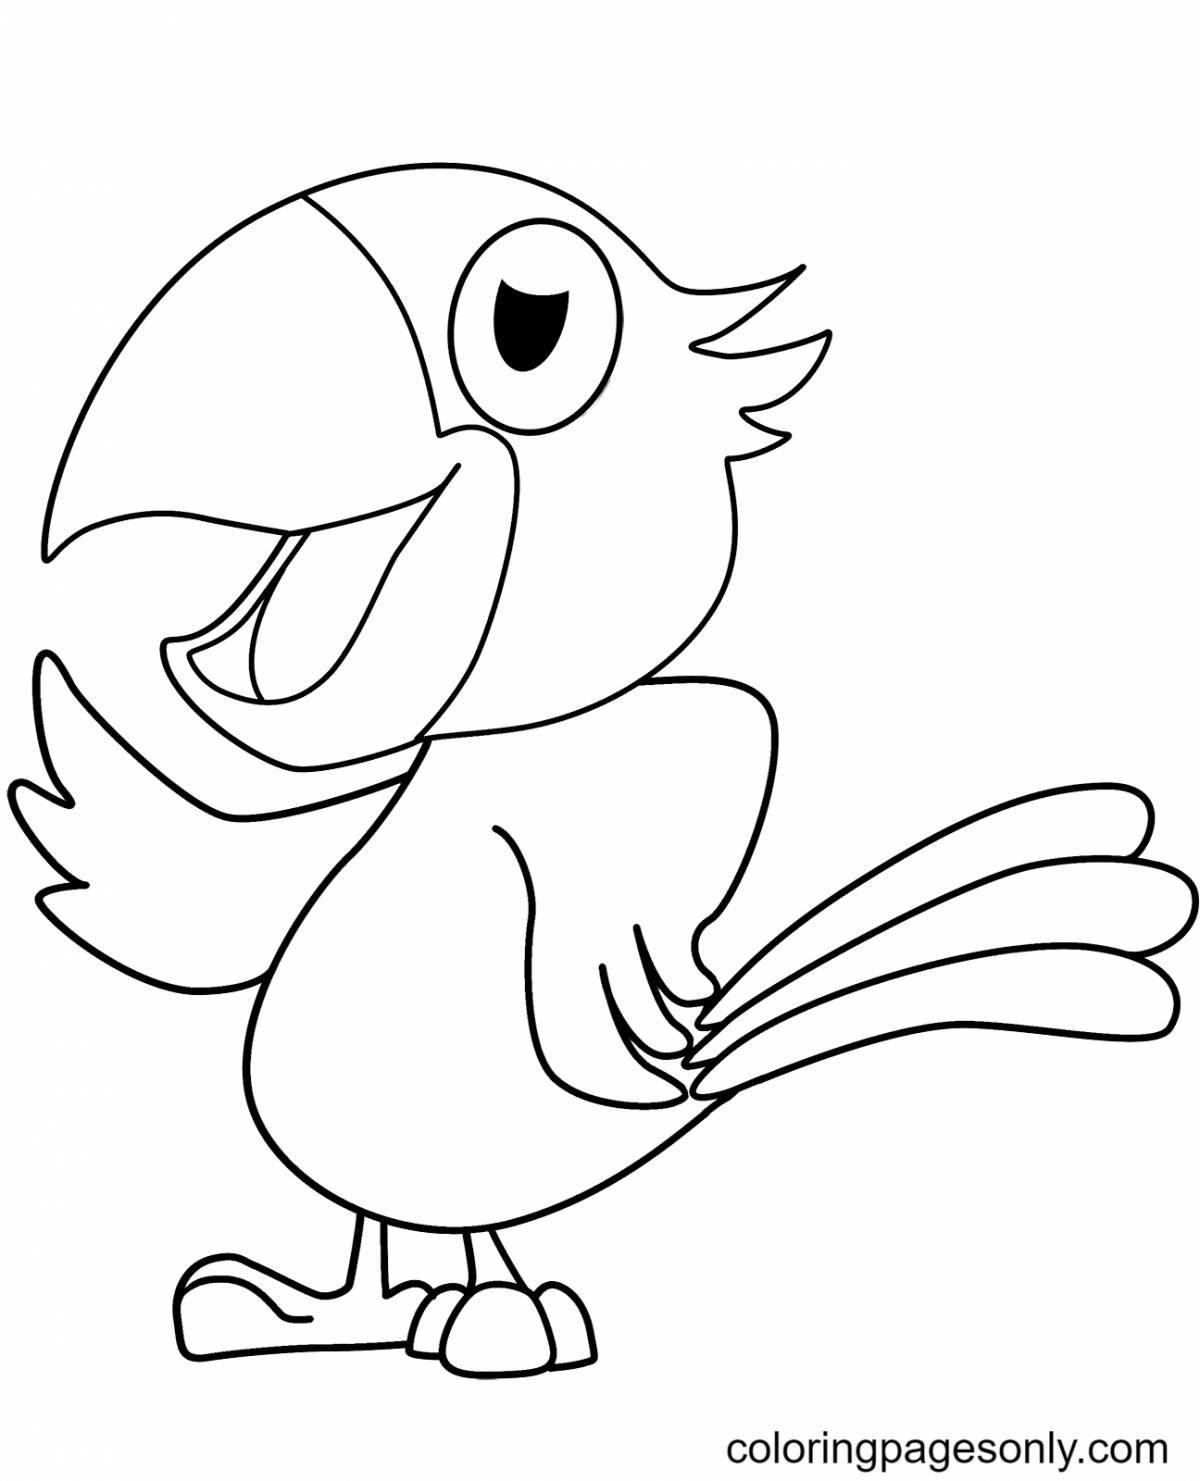 Adorable parrot drawing for kids